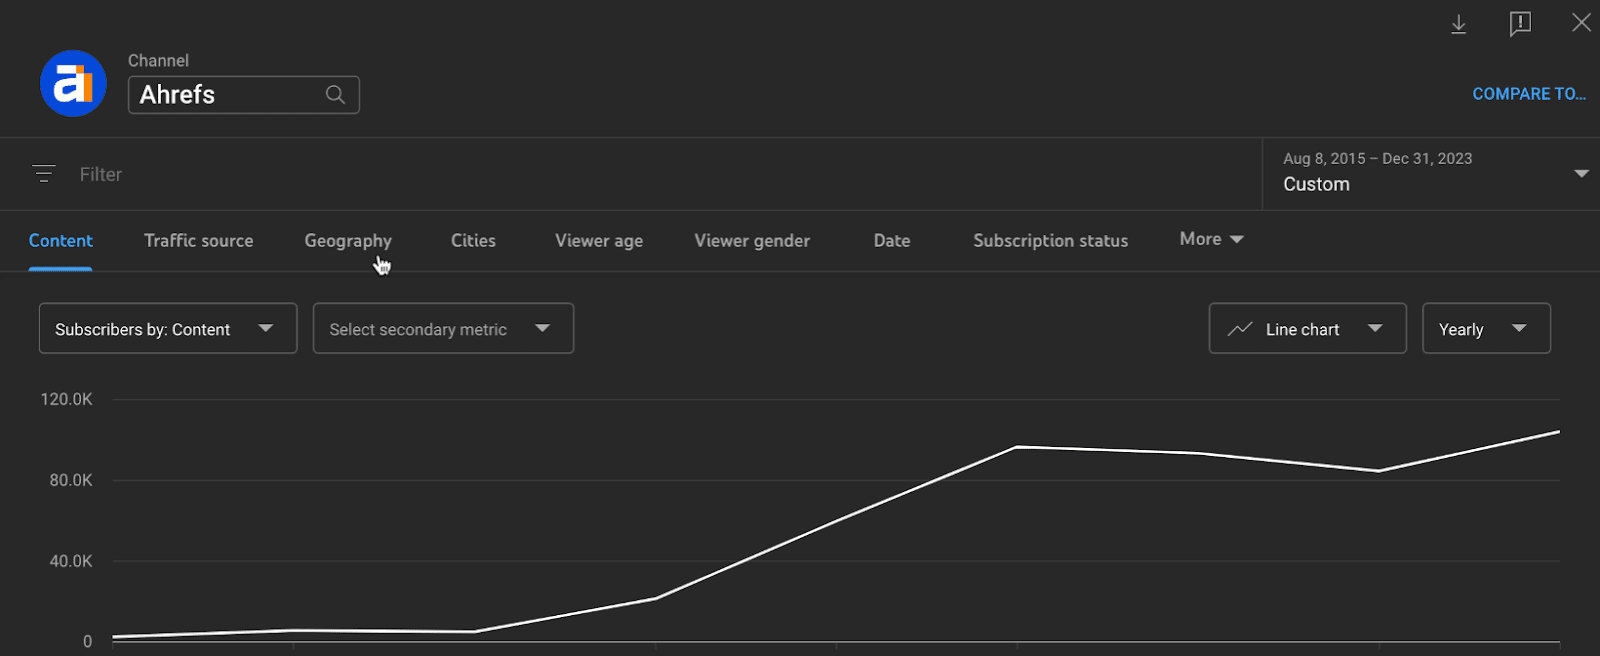 Audience growth data from YouTube.